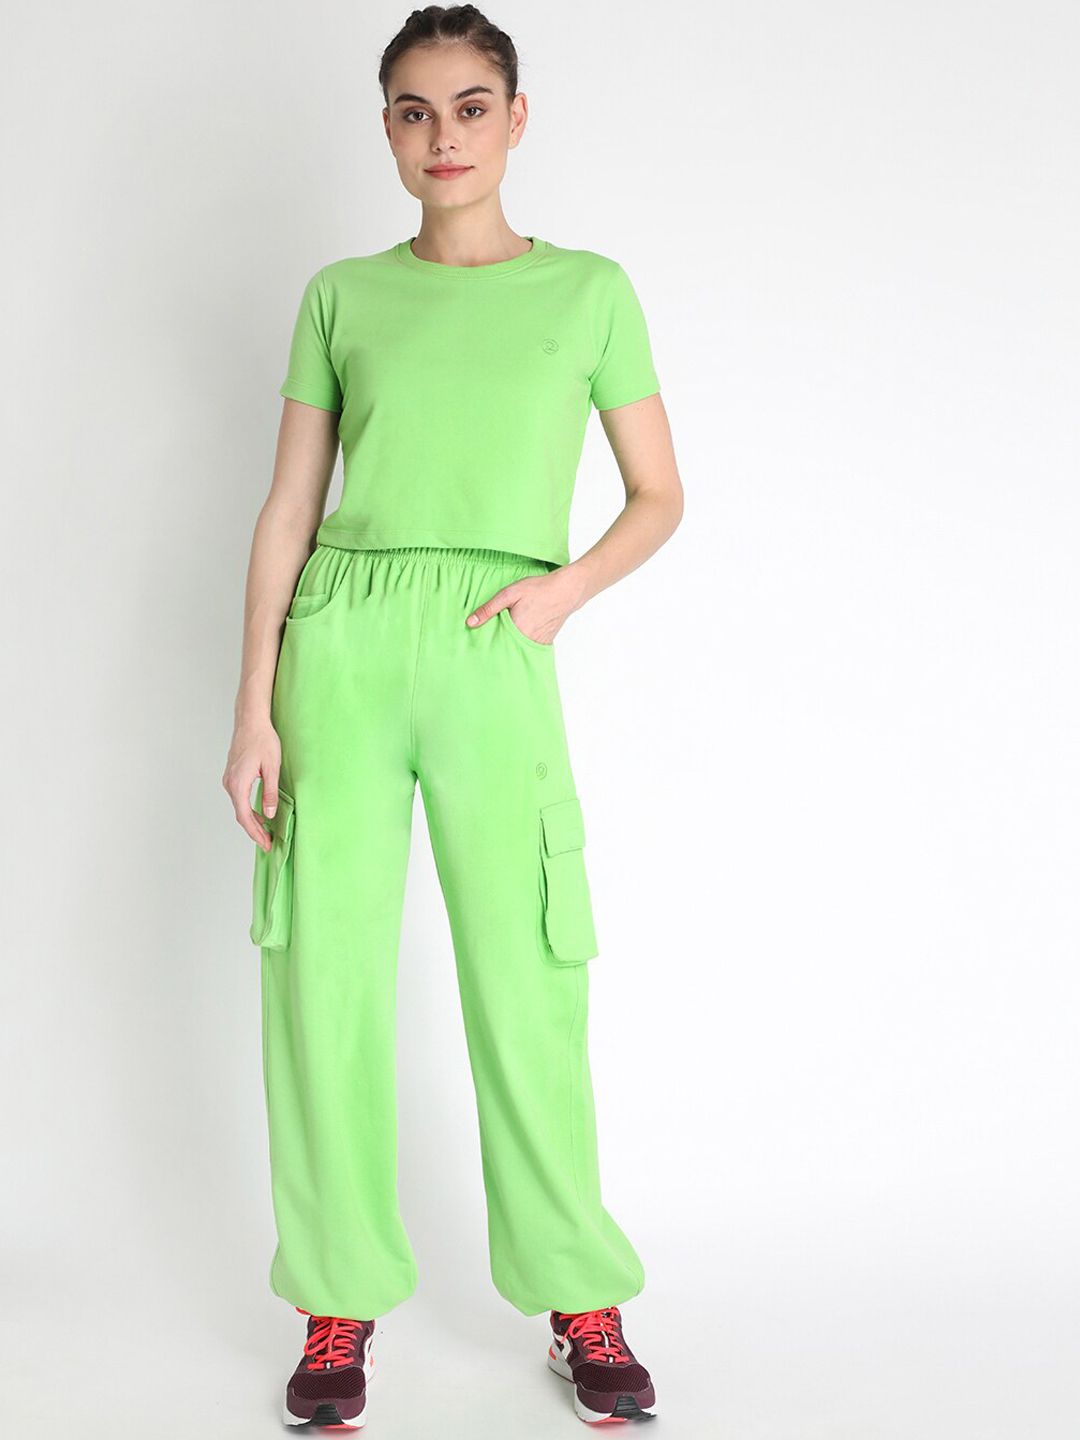 Chkokko Women Green Solid Tracksuit Price in India